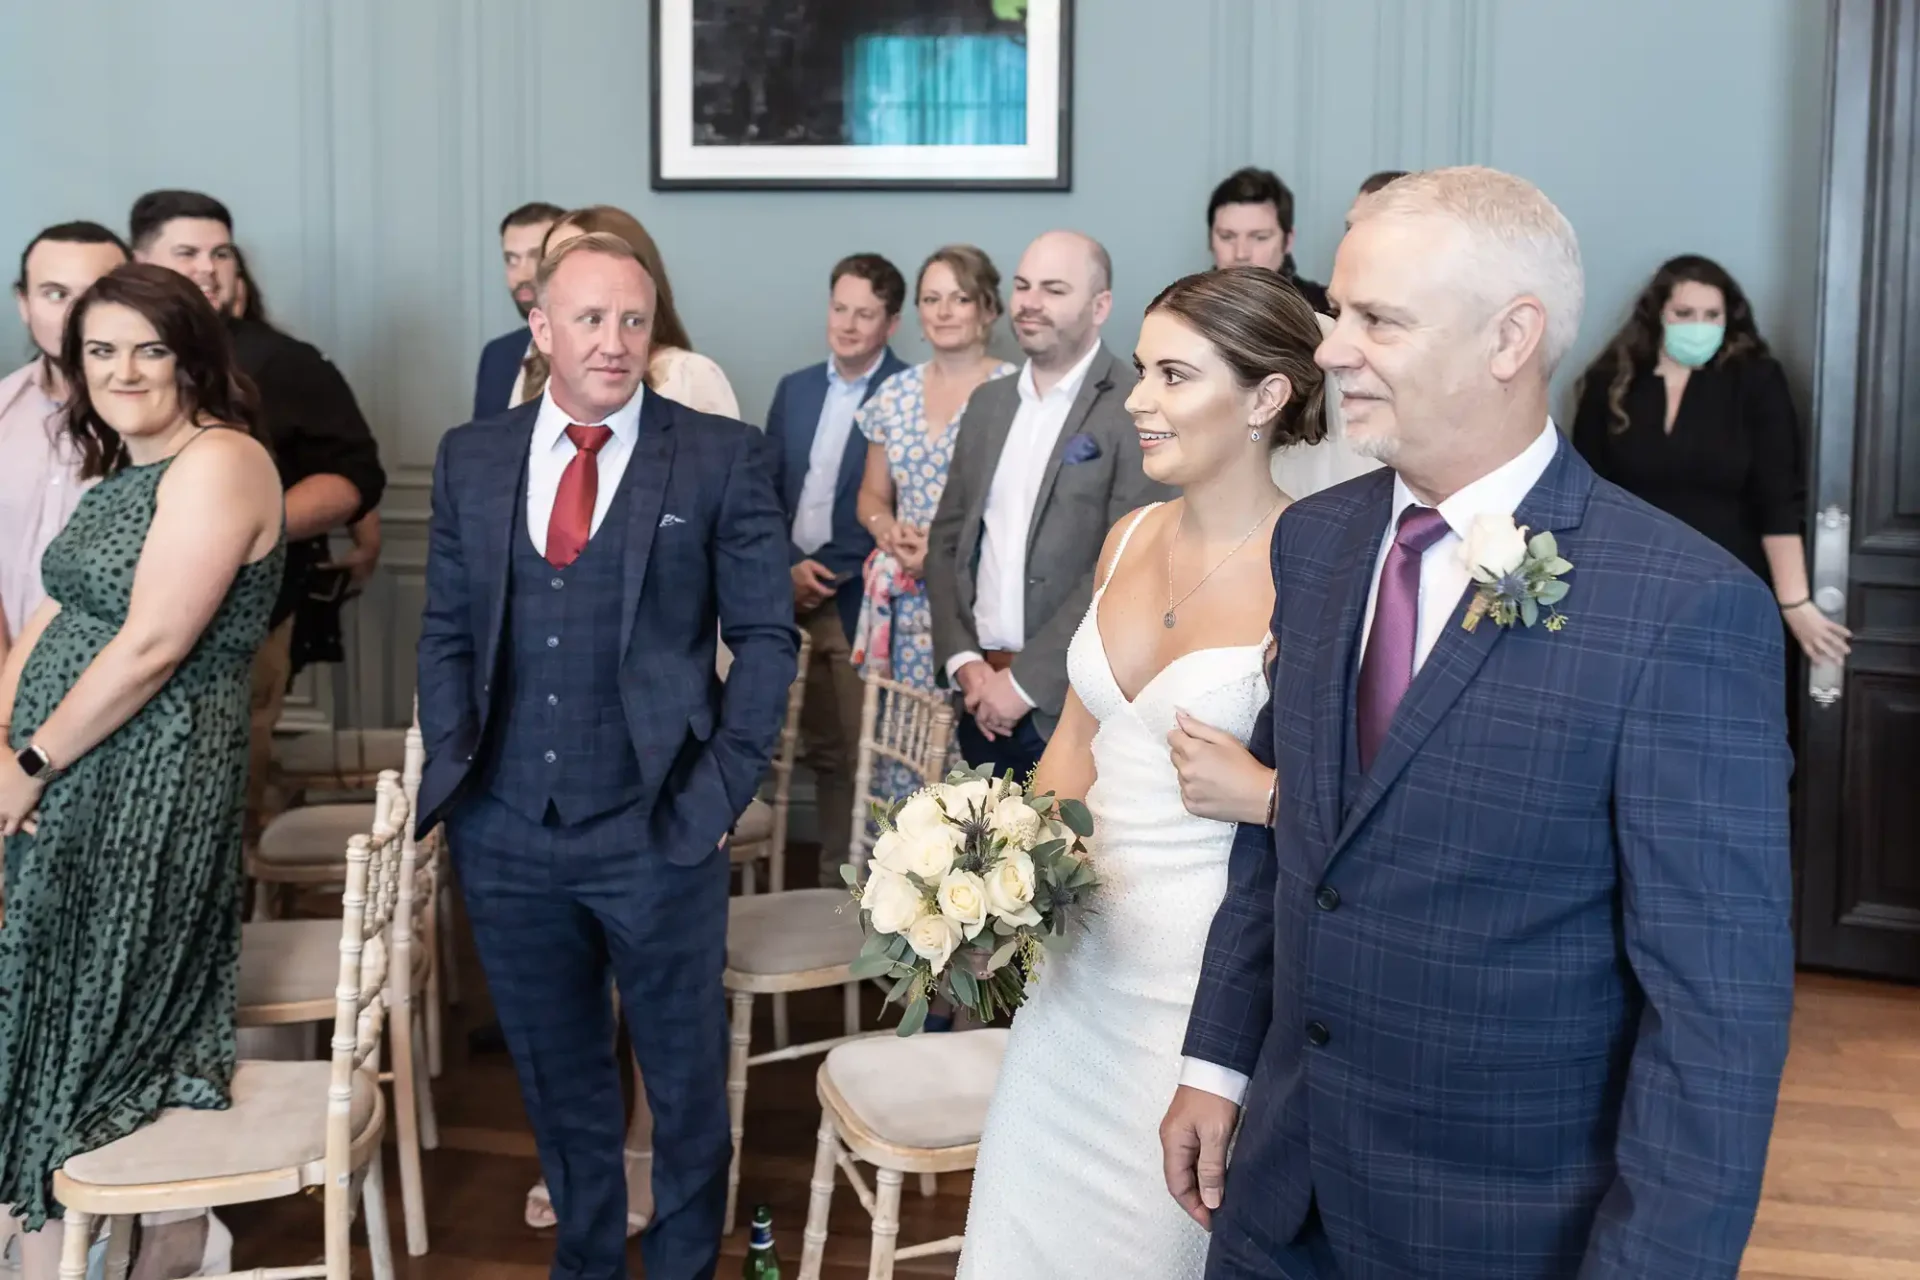 A bride walks down the aisle with an older man by her side, both smiling, as guests watch at an indoor wedding ceremony.